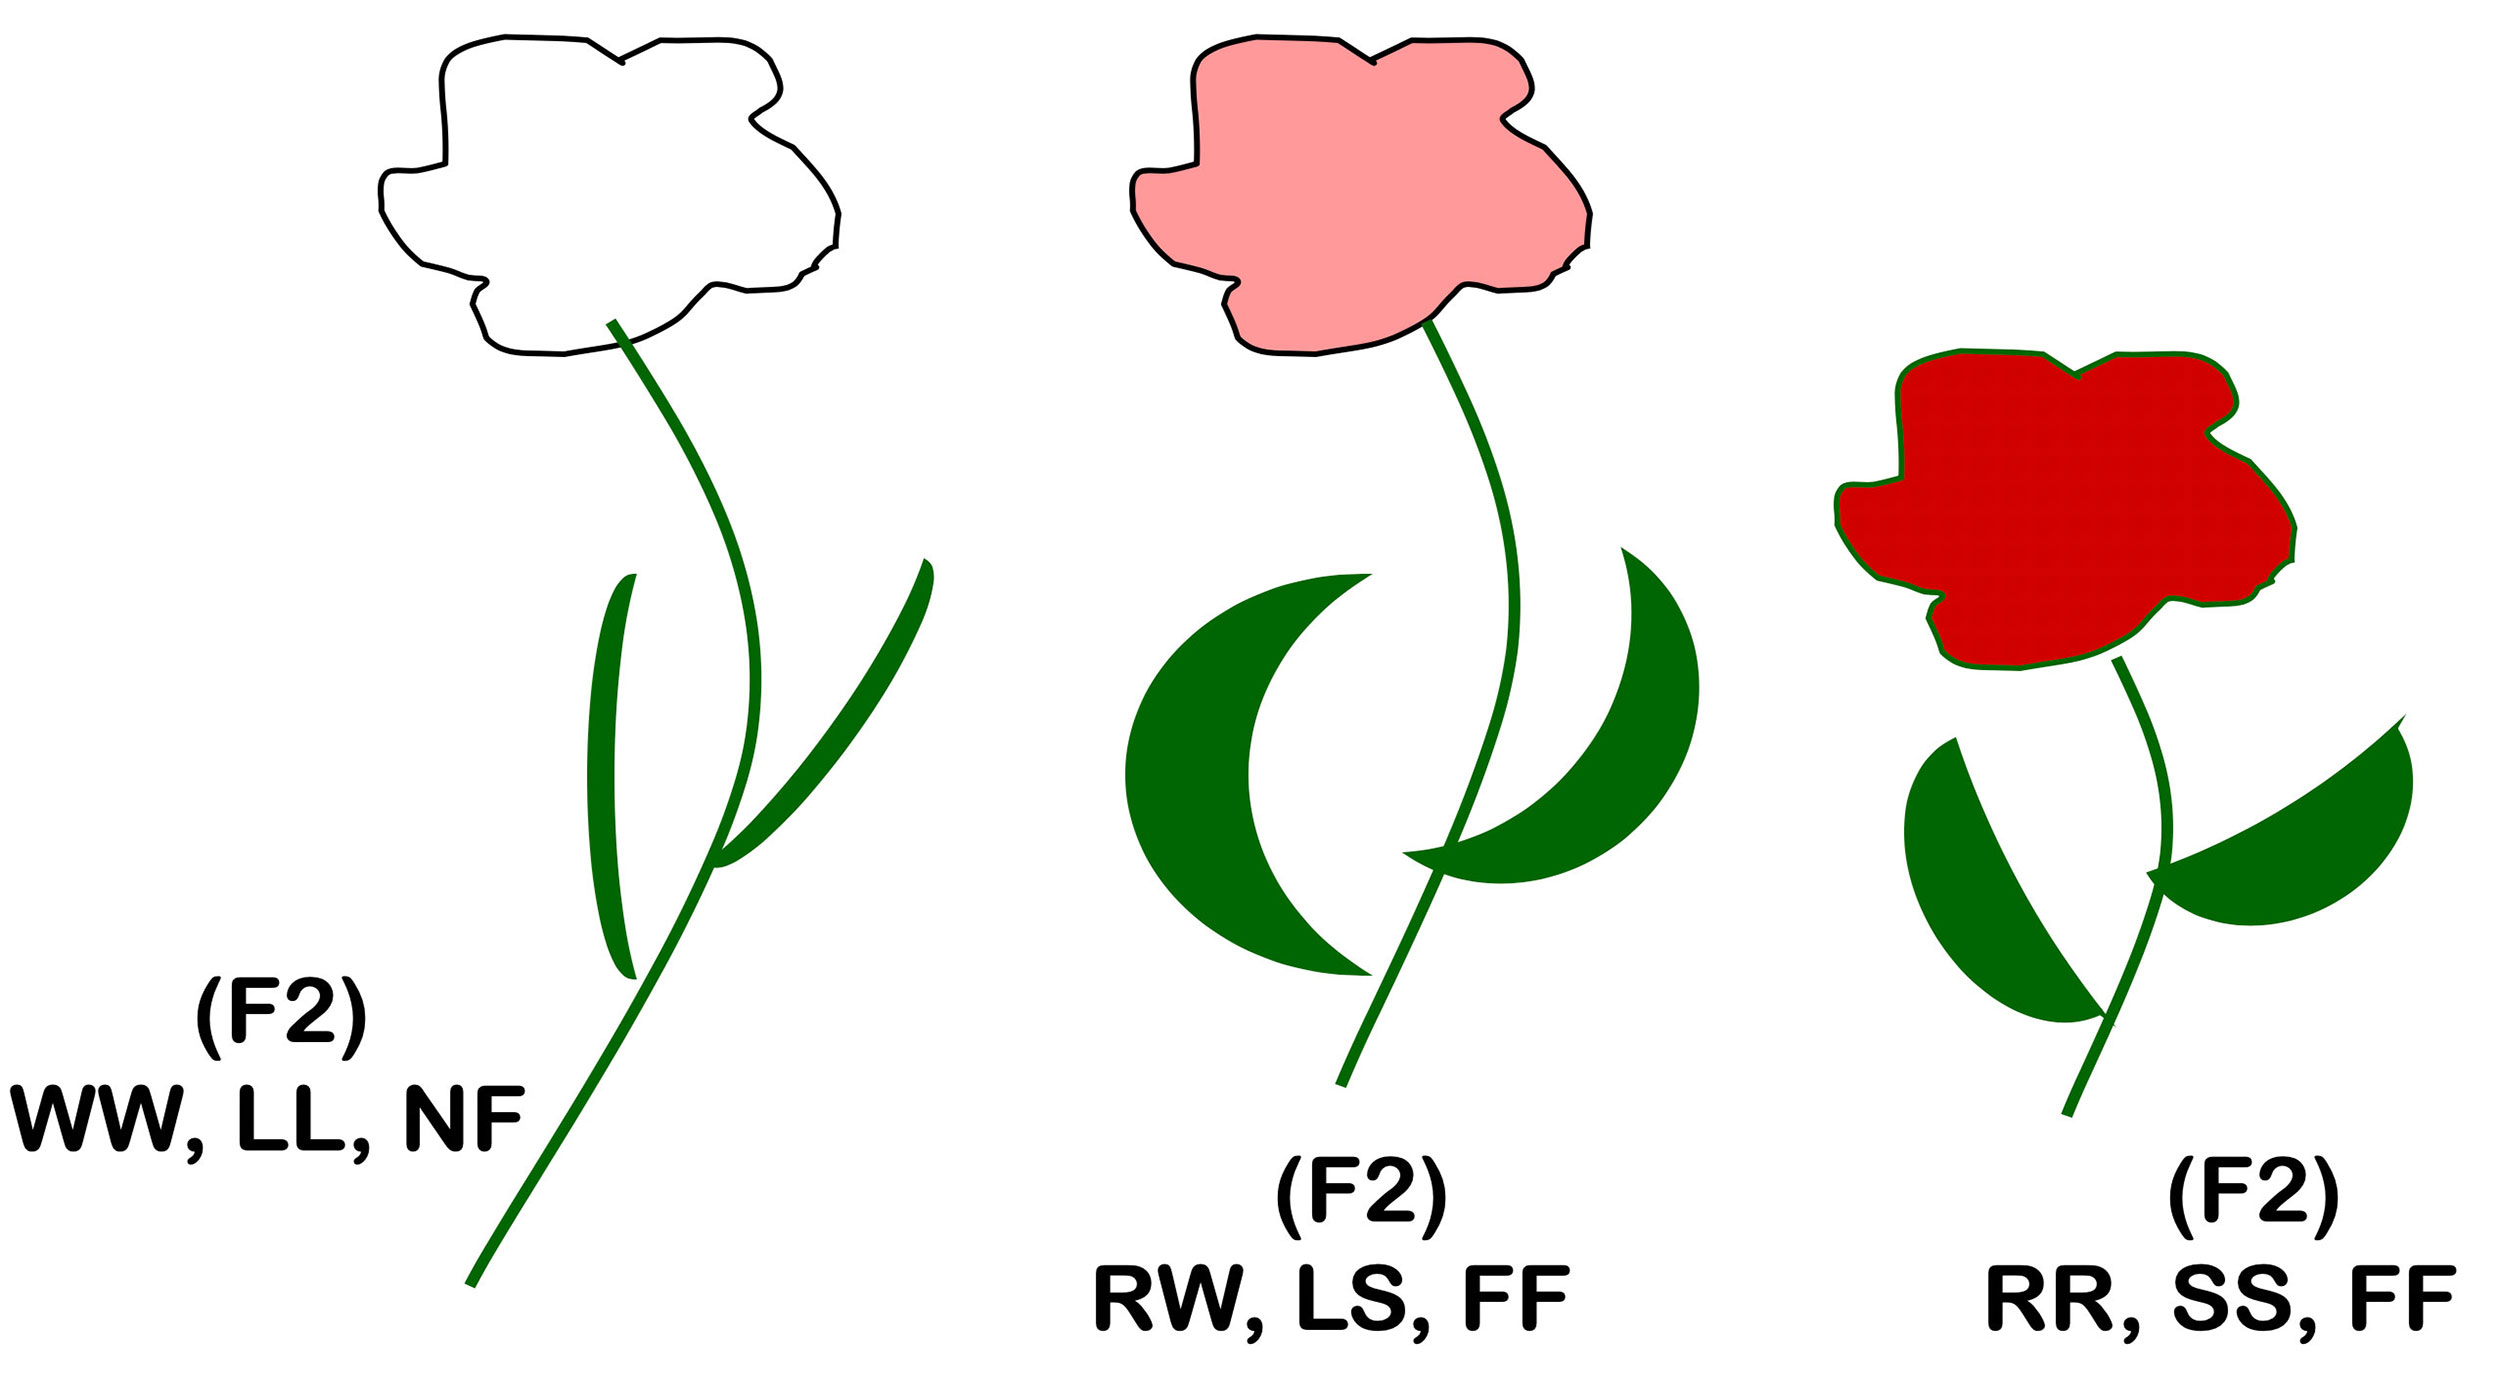 long stem, and narrow leaves. (Traits: WW, LL, NF) The second has a long stem, fat leaves, and a pink flower. (Traits: RW, LS, FF) The third has a short stem, fat leaves, and a red flower. (Traits: RR, SS, FF)